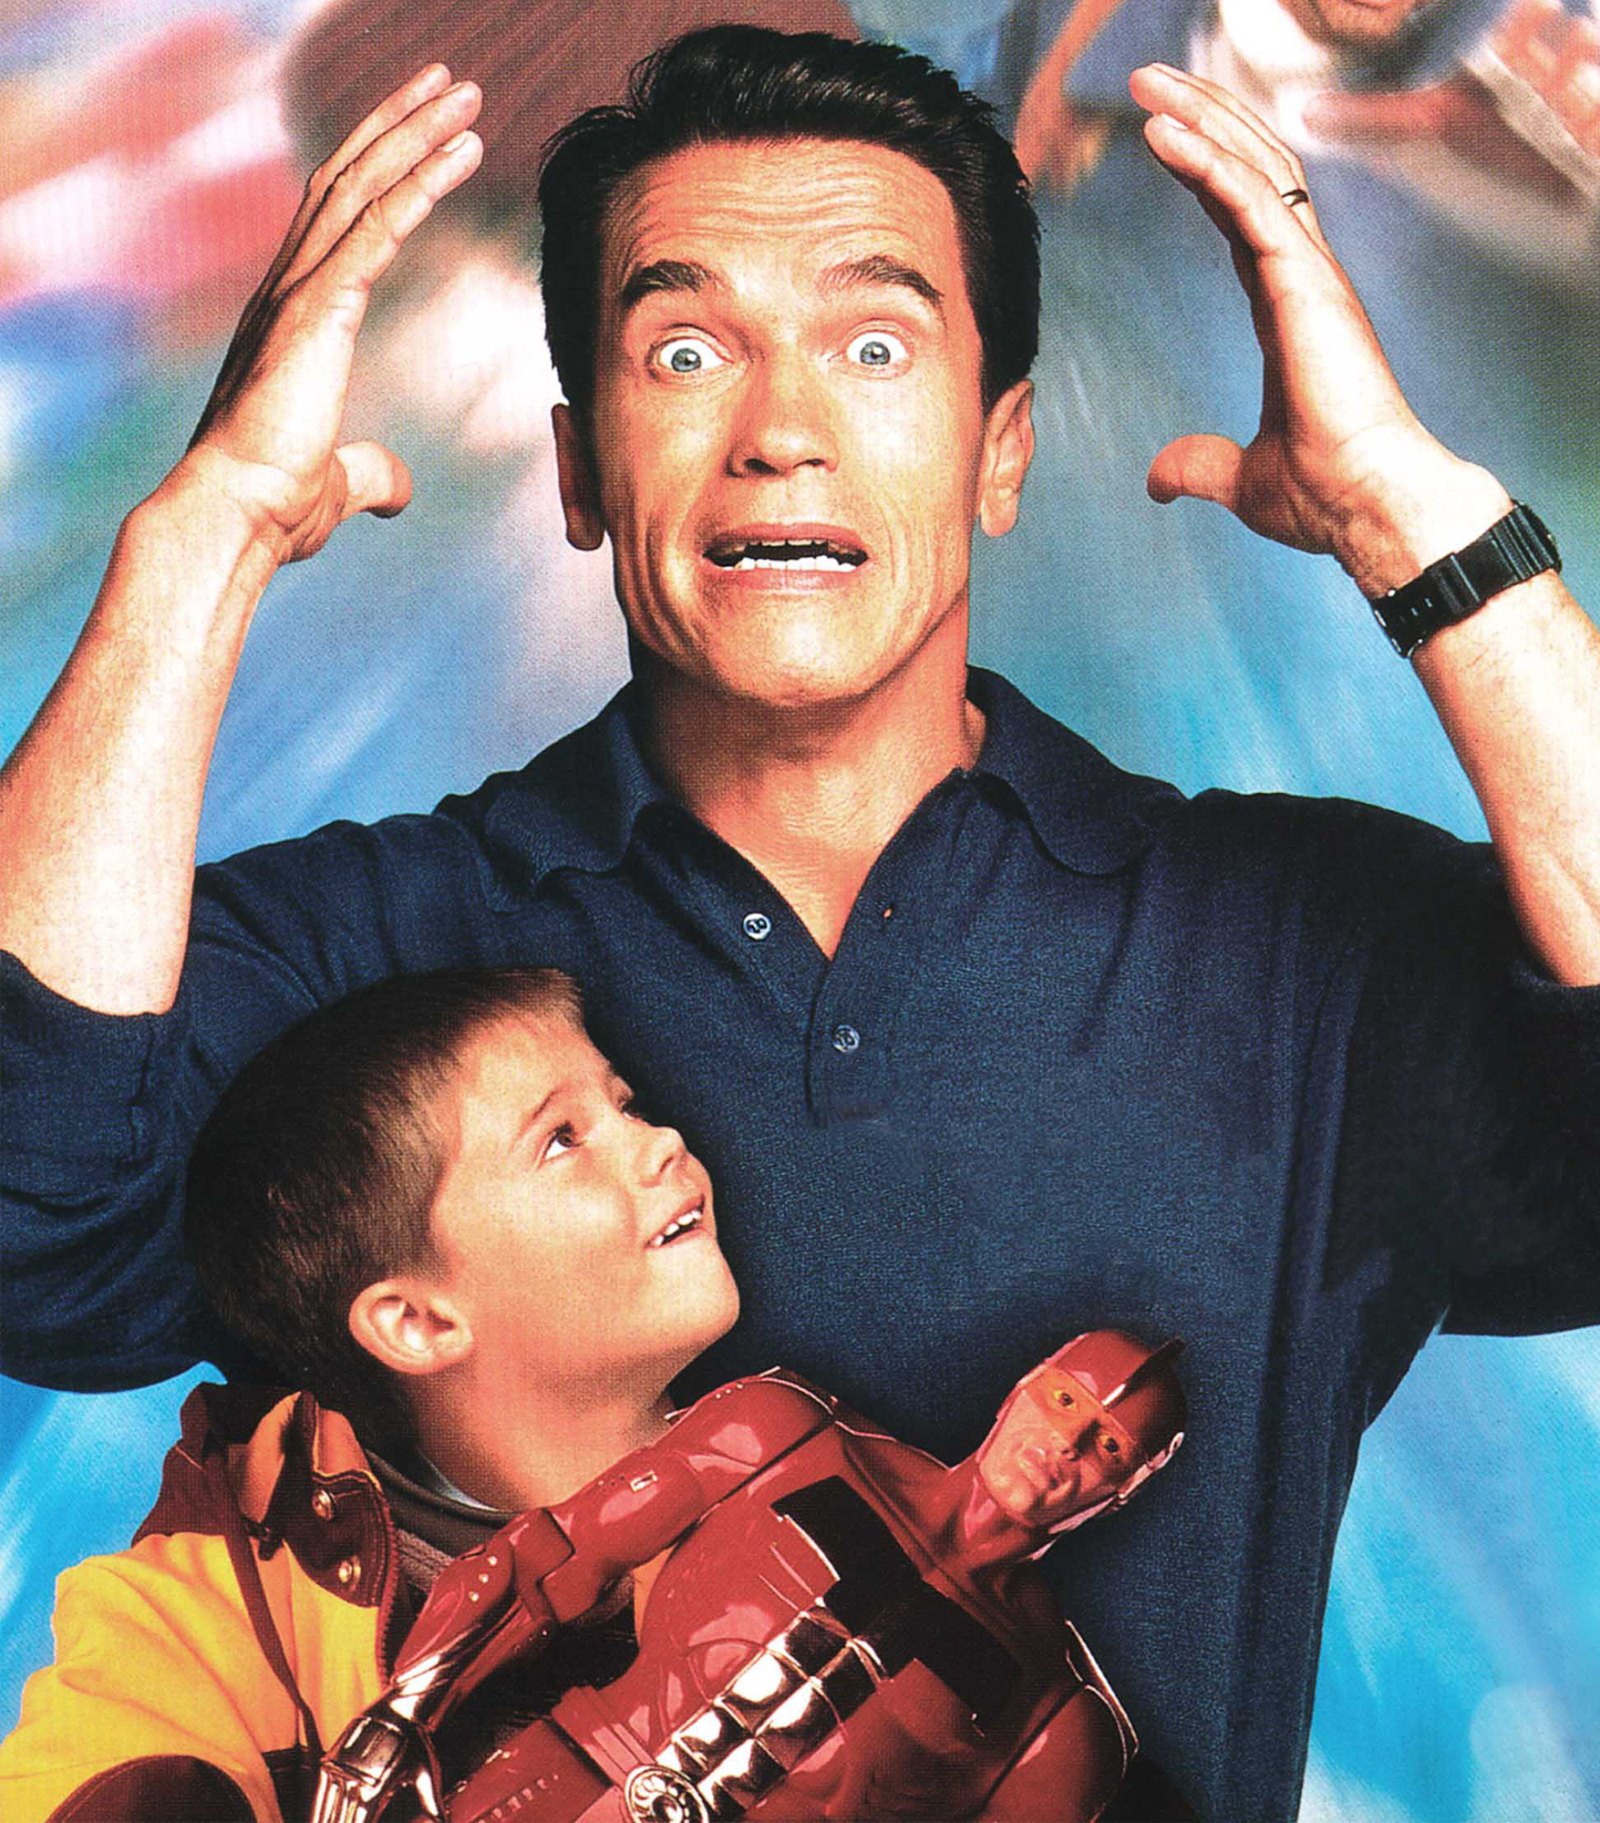 'Jingle All the Way' Cast- Where Are They Now? Arnold Schwarzenegger, Sinbad and More 375